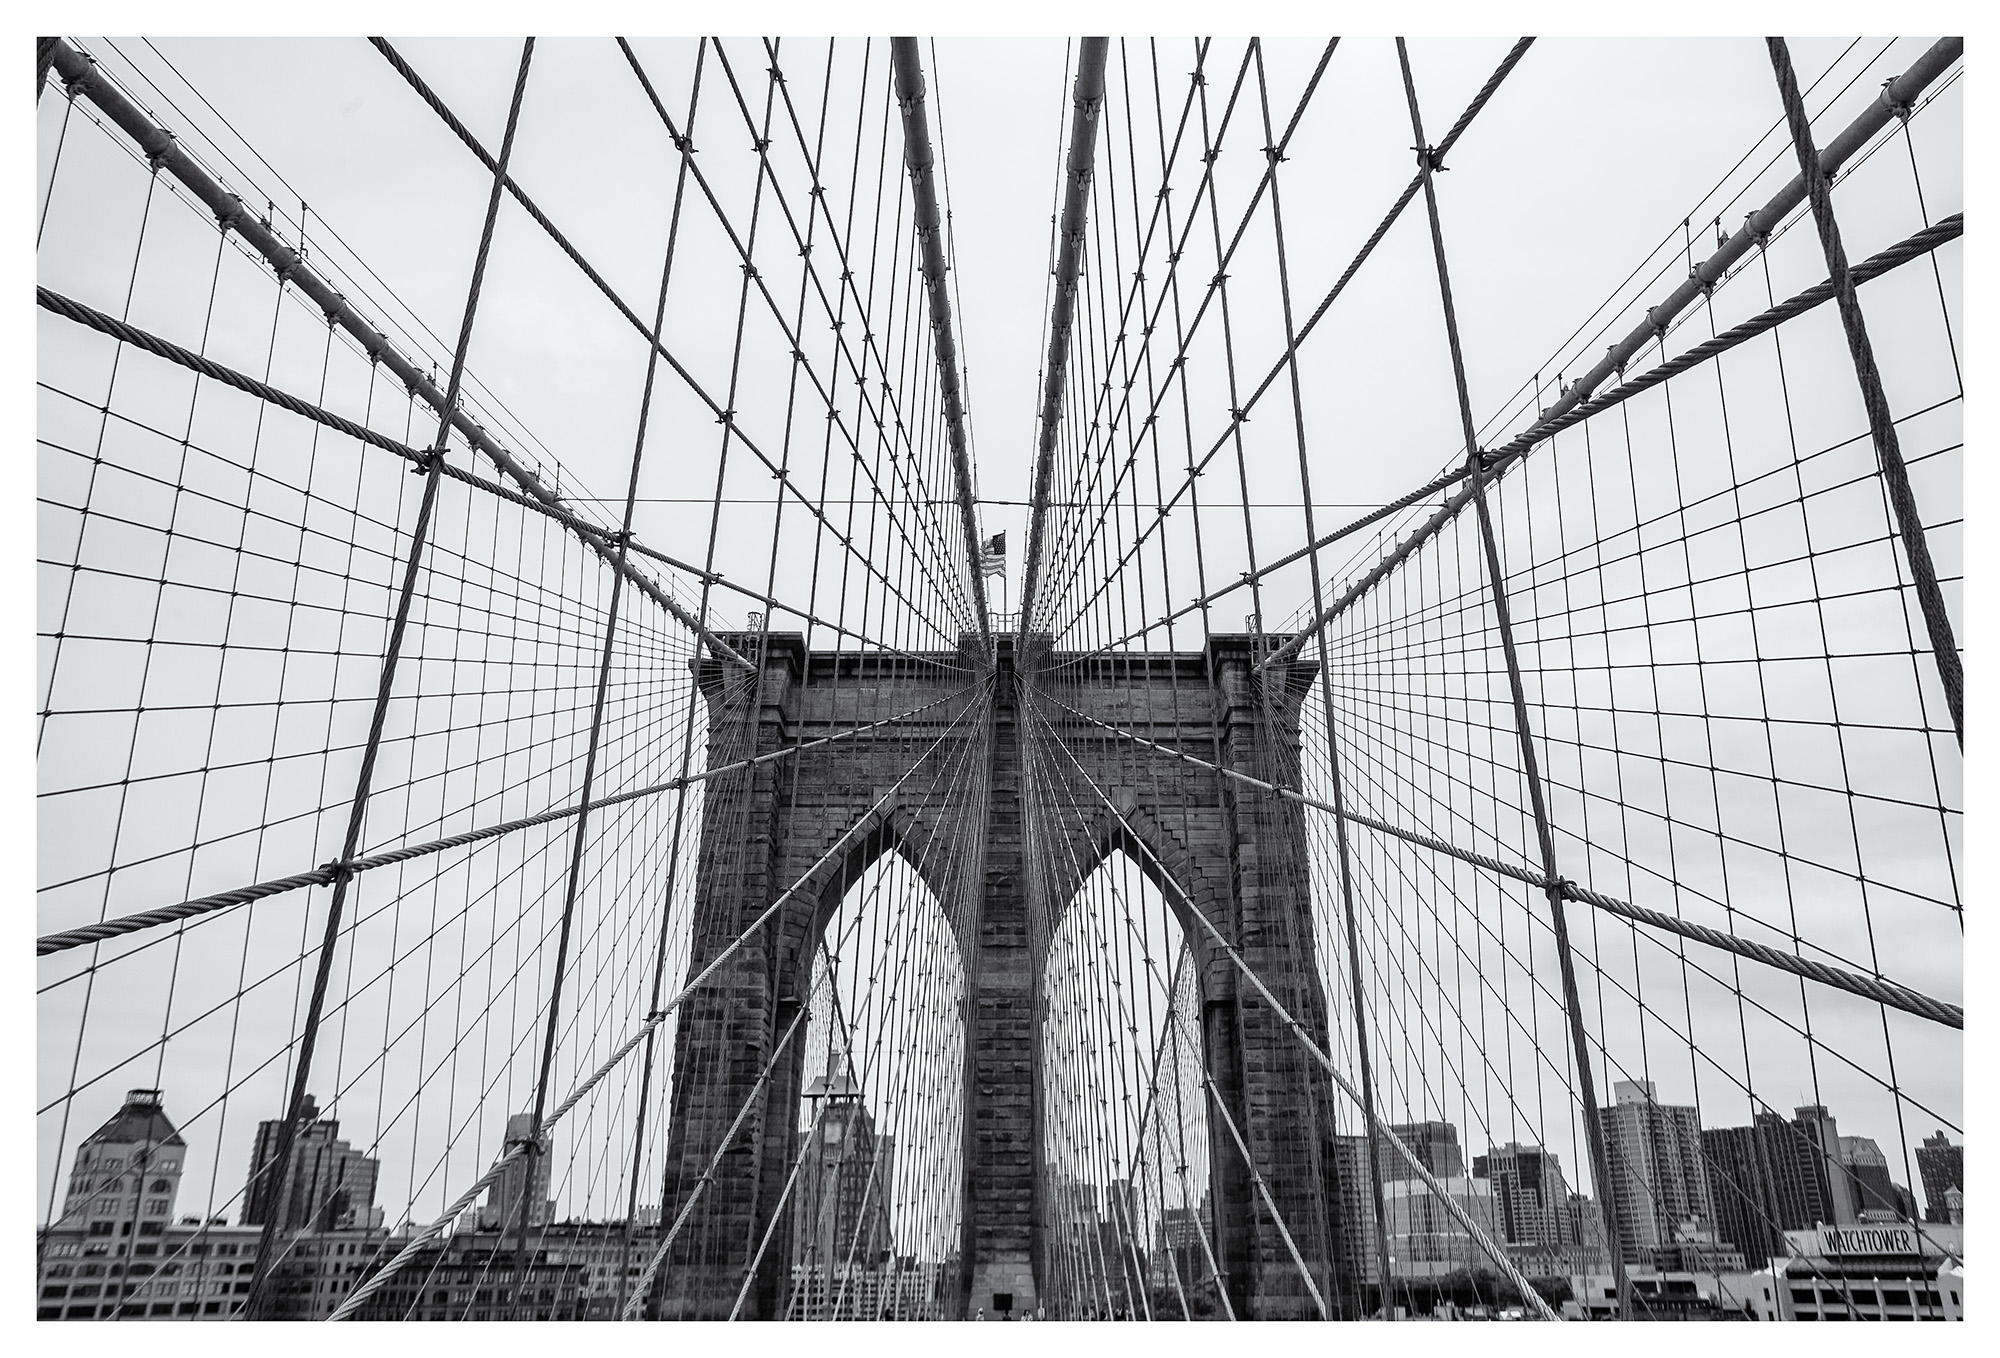 This black and white image captures the Brooklyn Bridge in all its symmetrical glory. While crossing, the intricate web of wires...